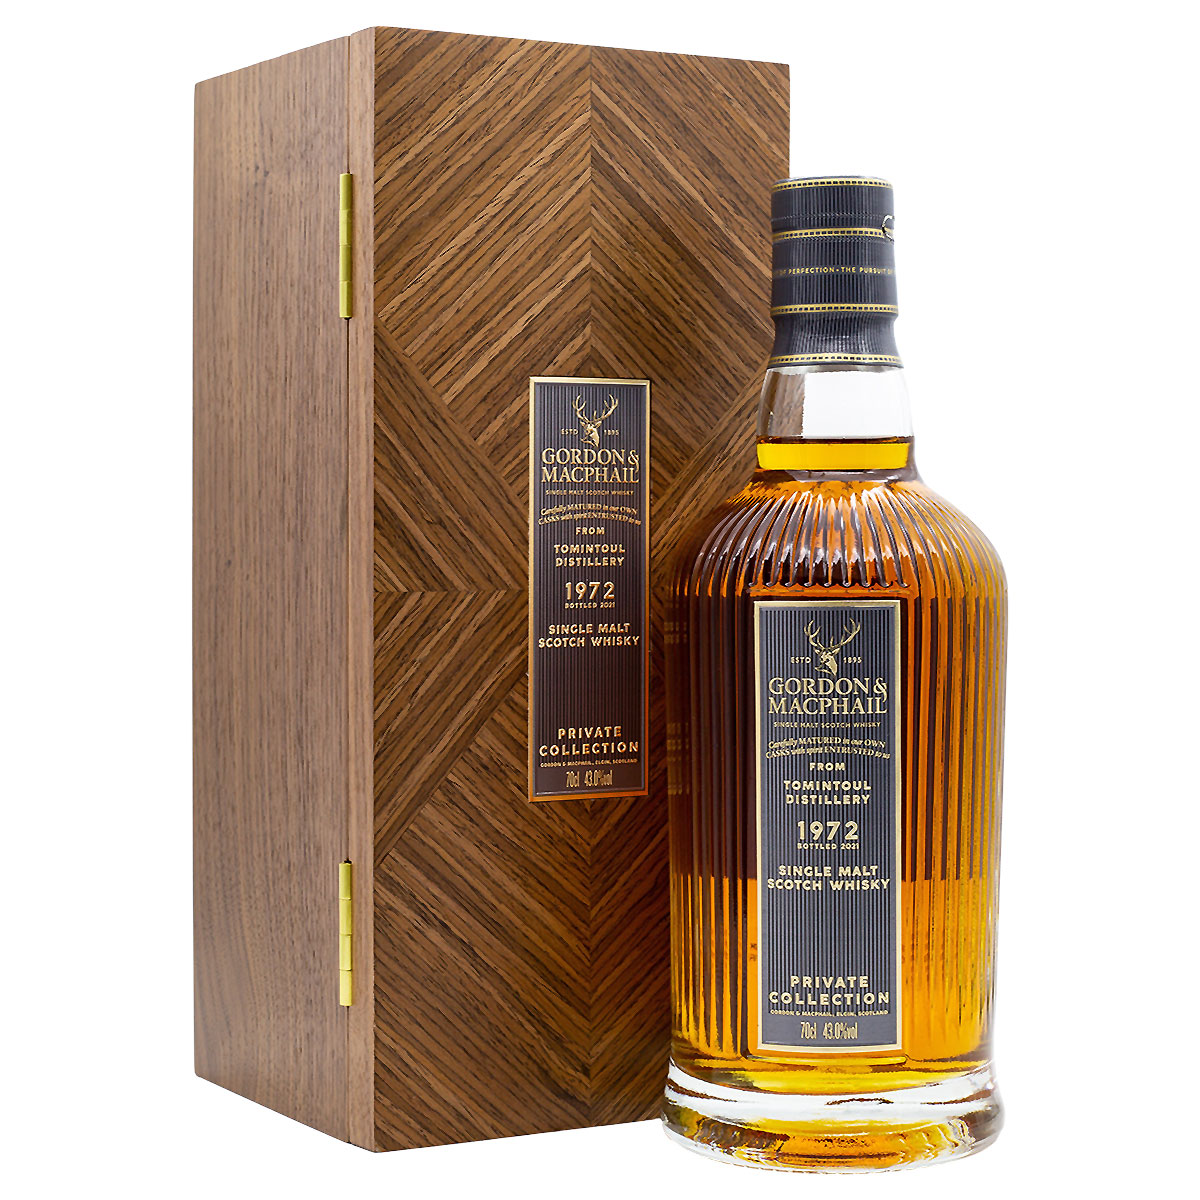 Whisky aus der Private Collection: Gordon & MacPhail Tomintoul 48 Years Cask 2965